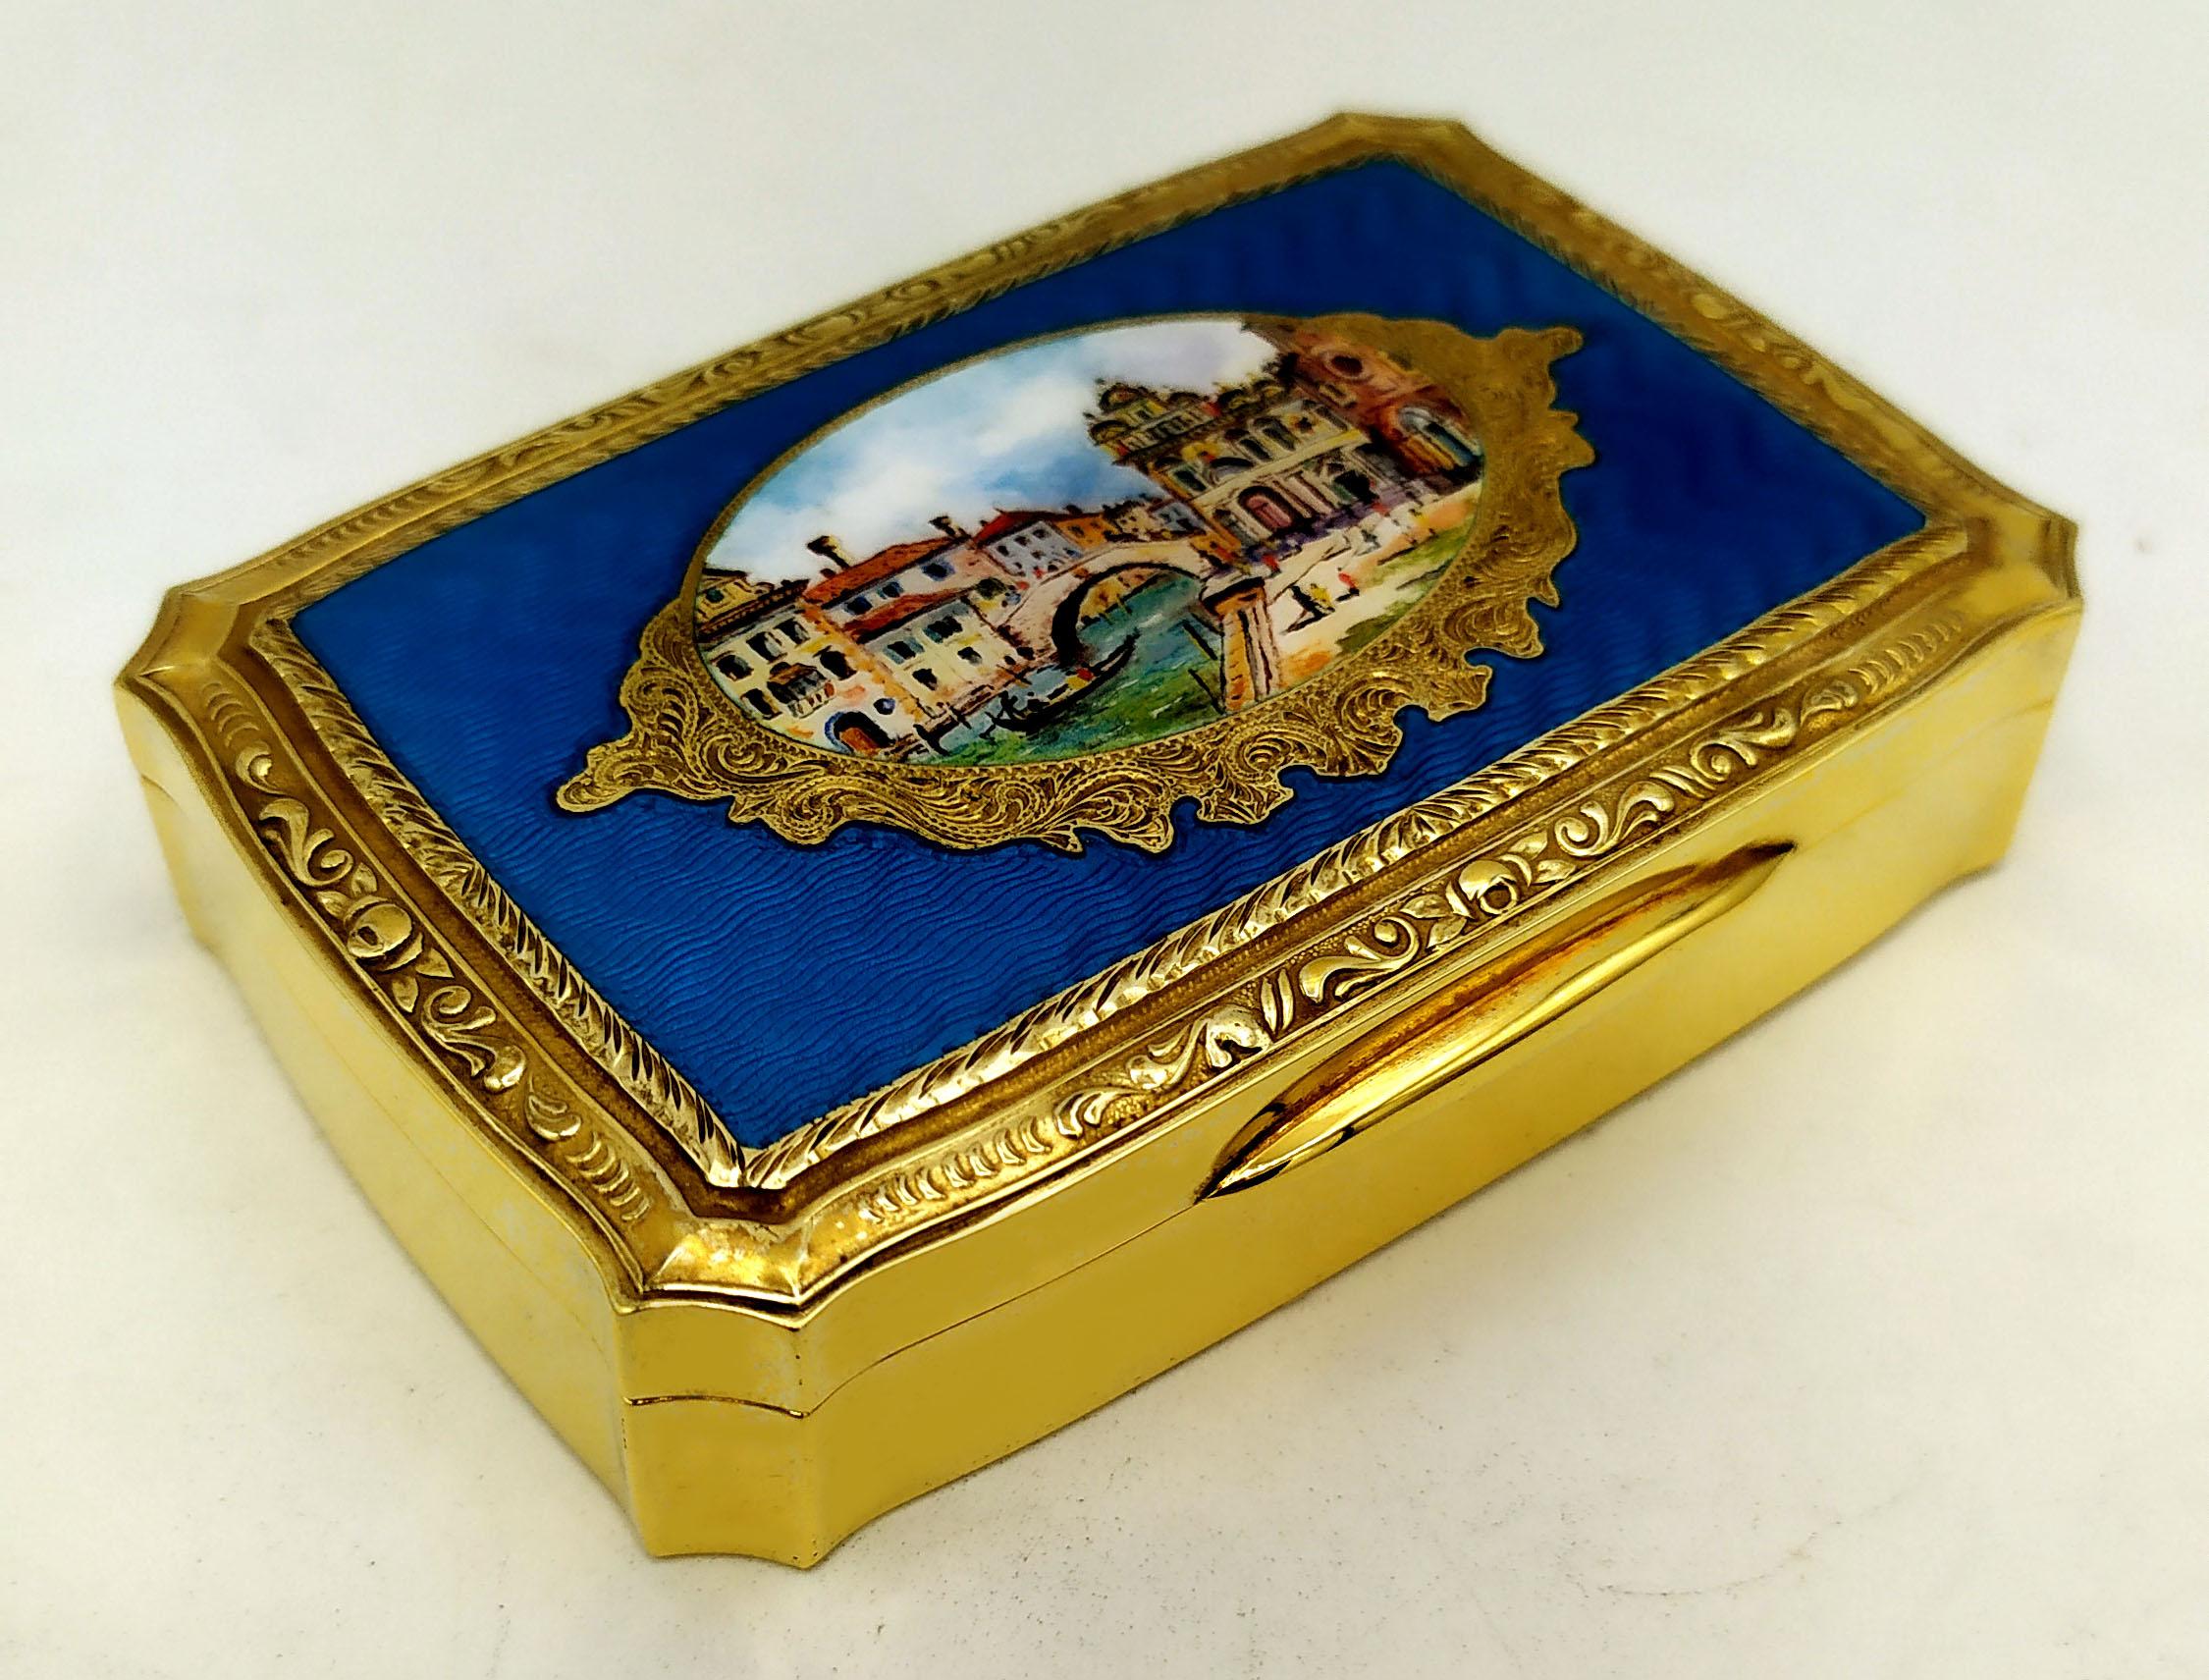 Snuff Box Snuff Box Venetian landscape is in 925/1000 sterling silver gold plated 24 carats..
Snuff Box Snuff Box Venetian landscape has translucent fired enamel on guilloche and miniature of a Venetian landscape hand-painted and fire-enamelled by